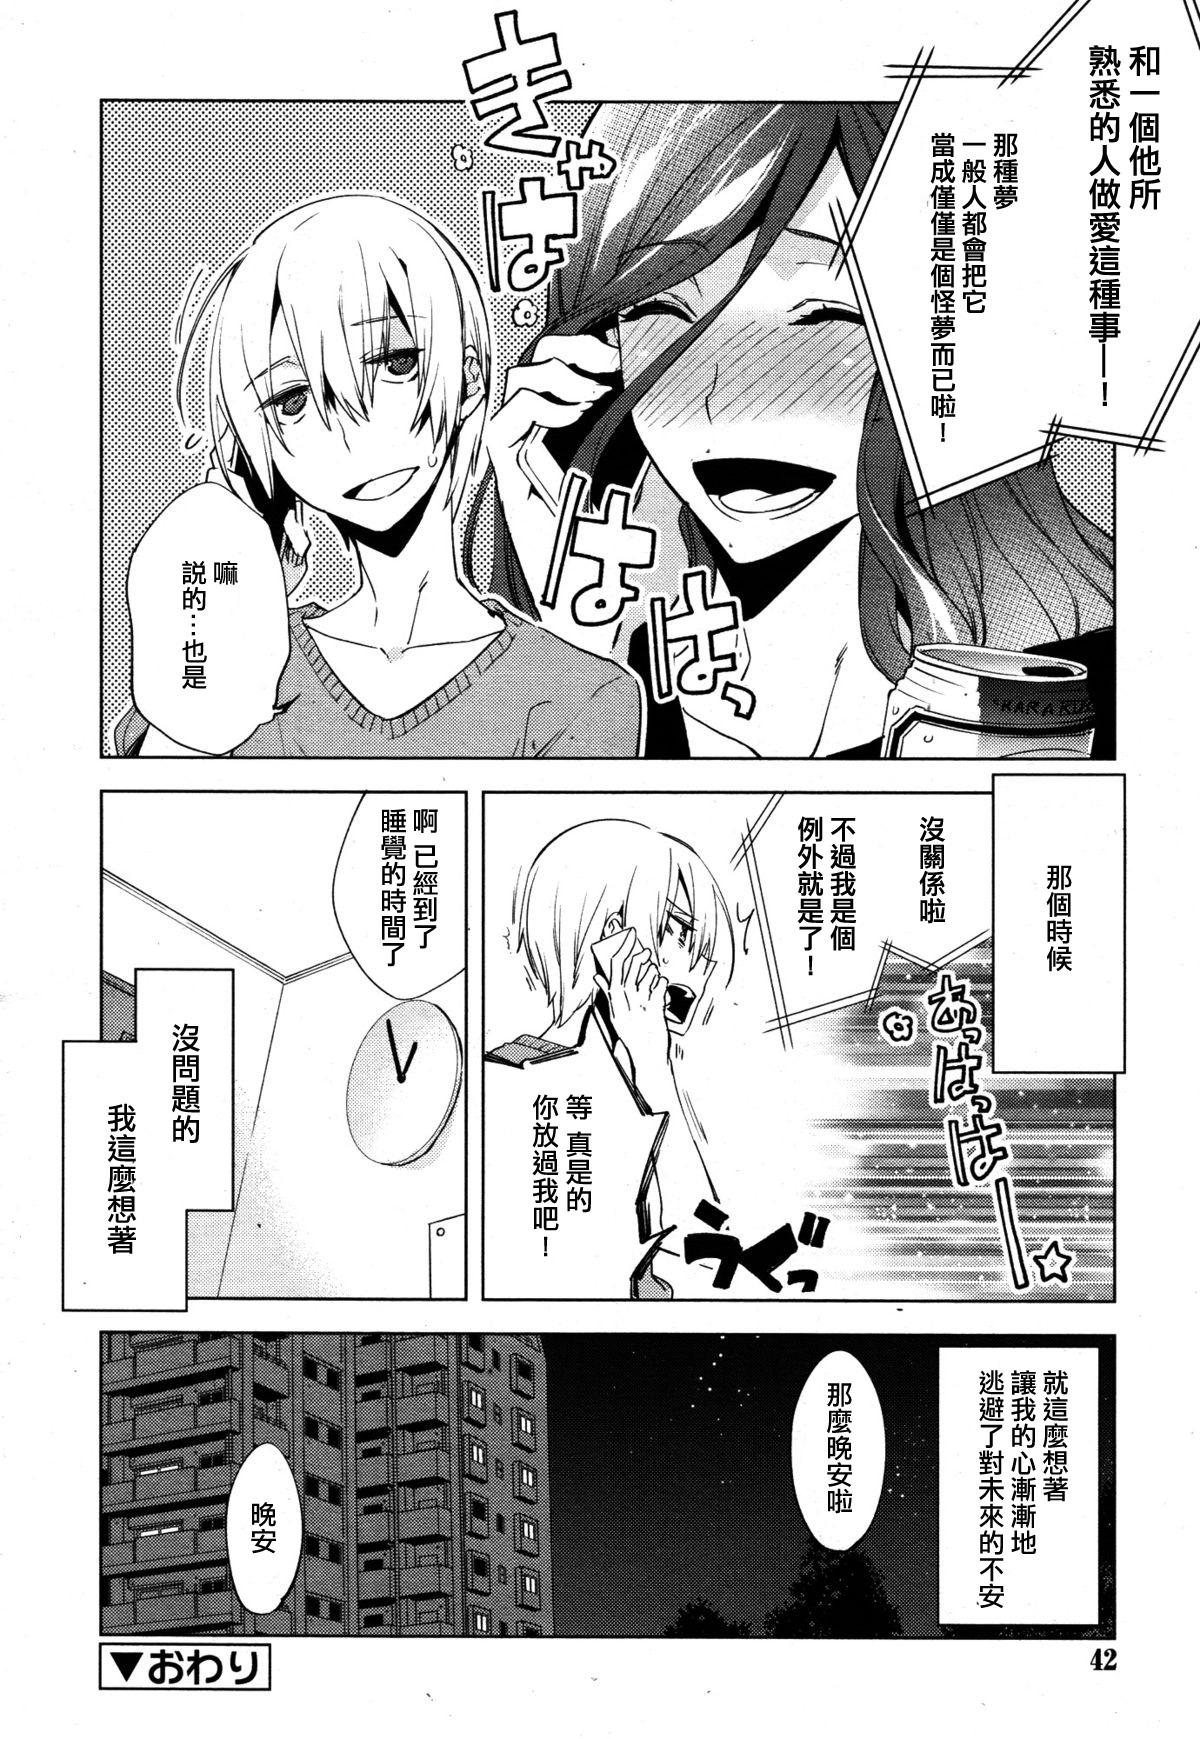 Anime Magical Insence Vol. 02 Lesbian Sex - Page 24